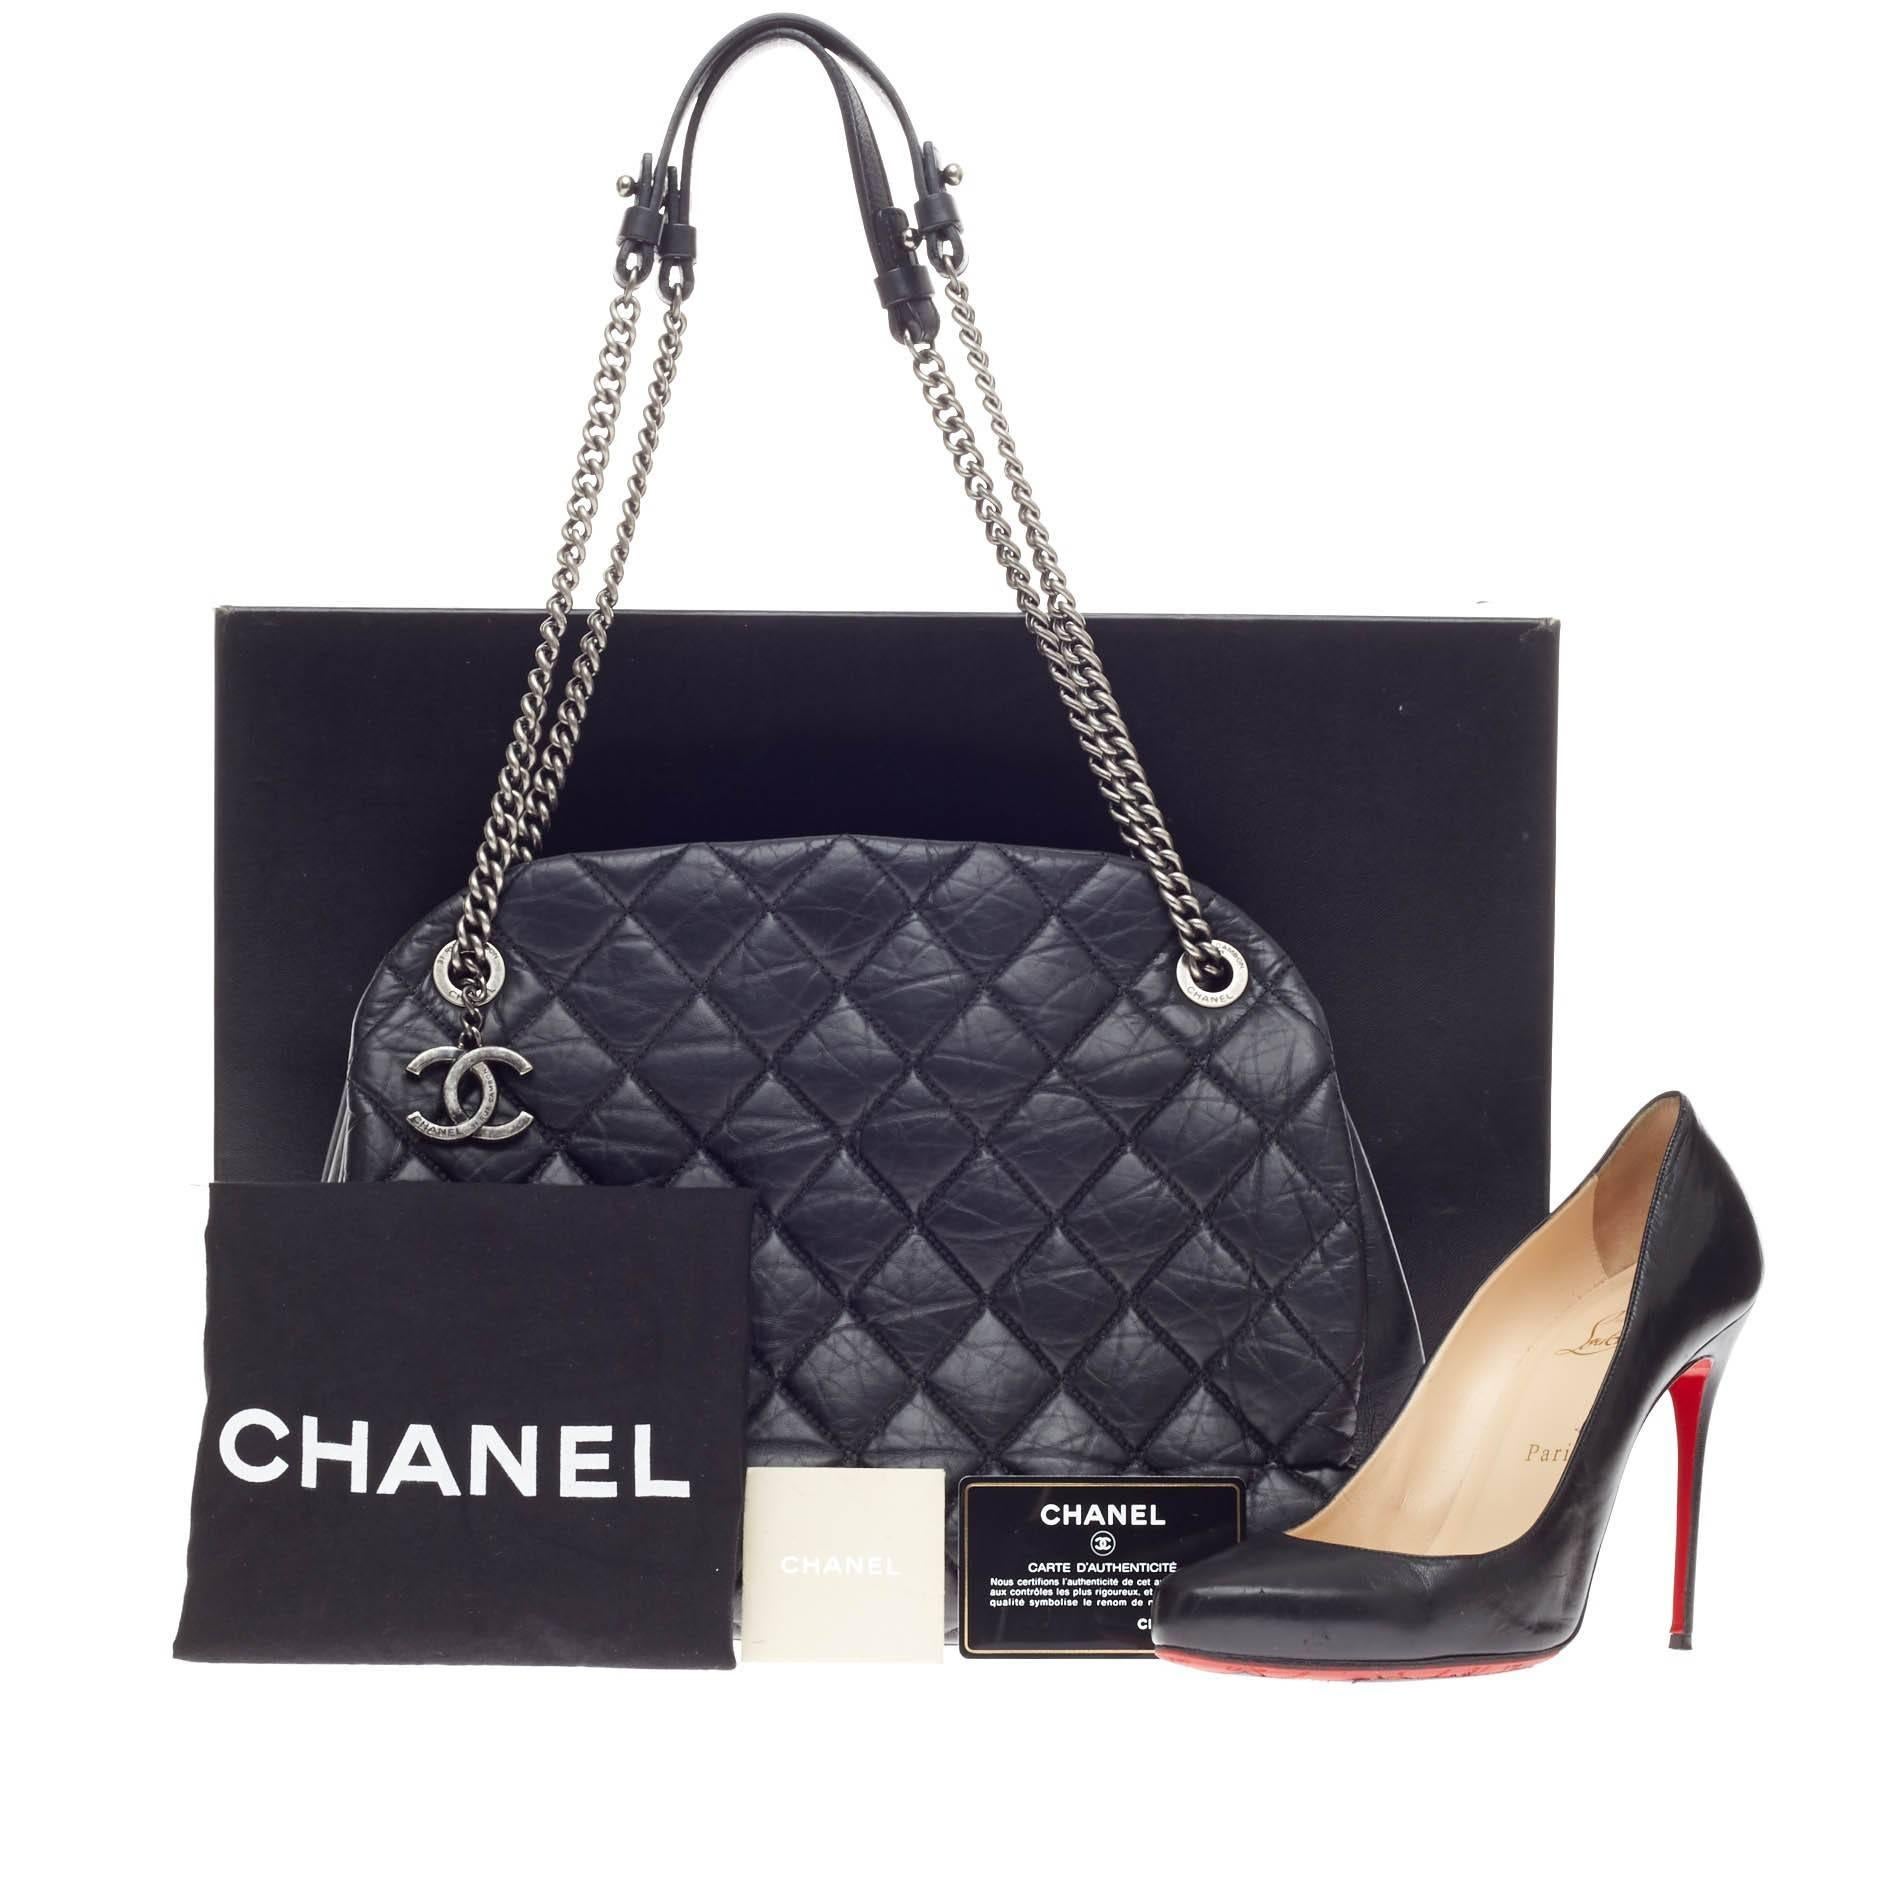 This authentic Chanel Stitched Mademoiselle Bowling Bag Aged Calfskin Large is a classic design with an edgy flair. Crafted in black diamond quilted distressed calfskin leather, this bowling bag features ruthenium chain strap with pads, protective